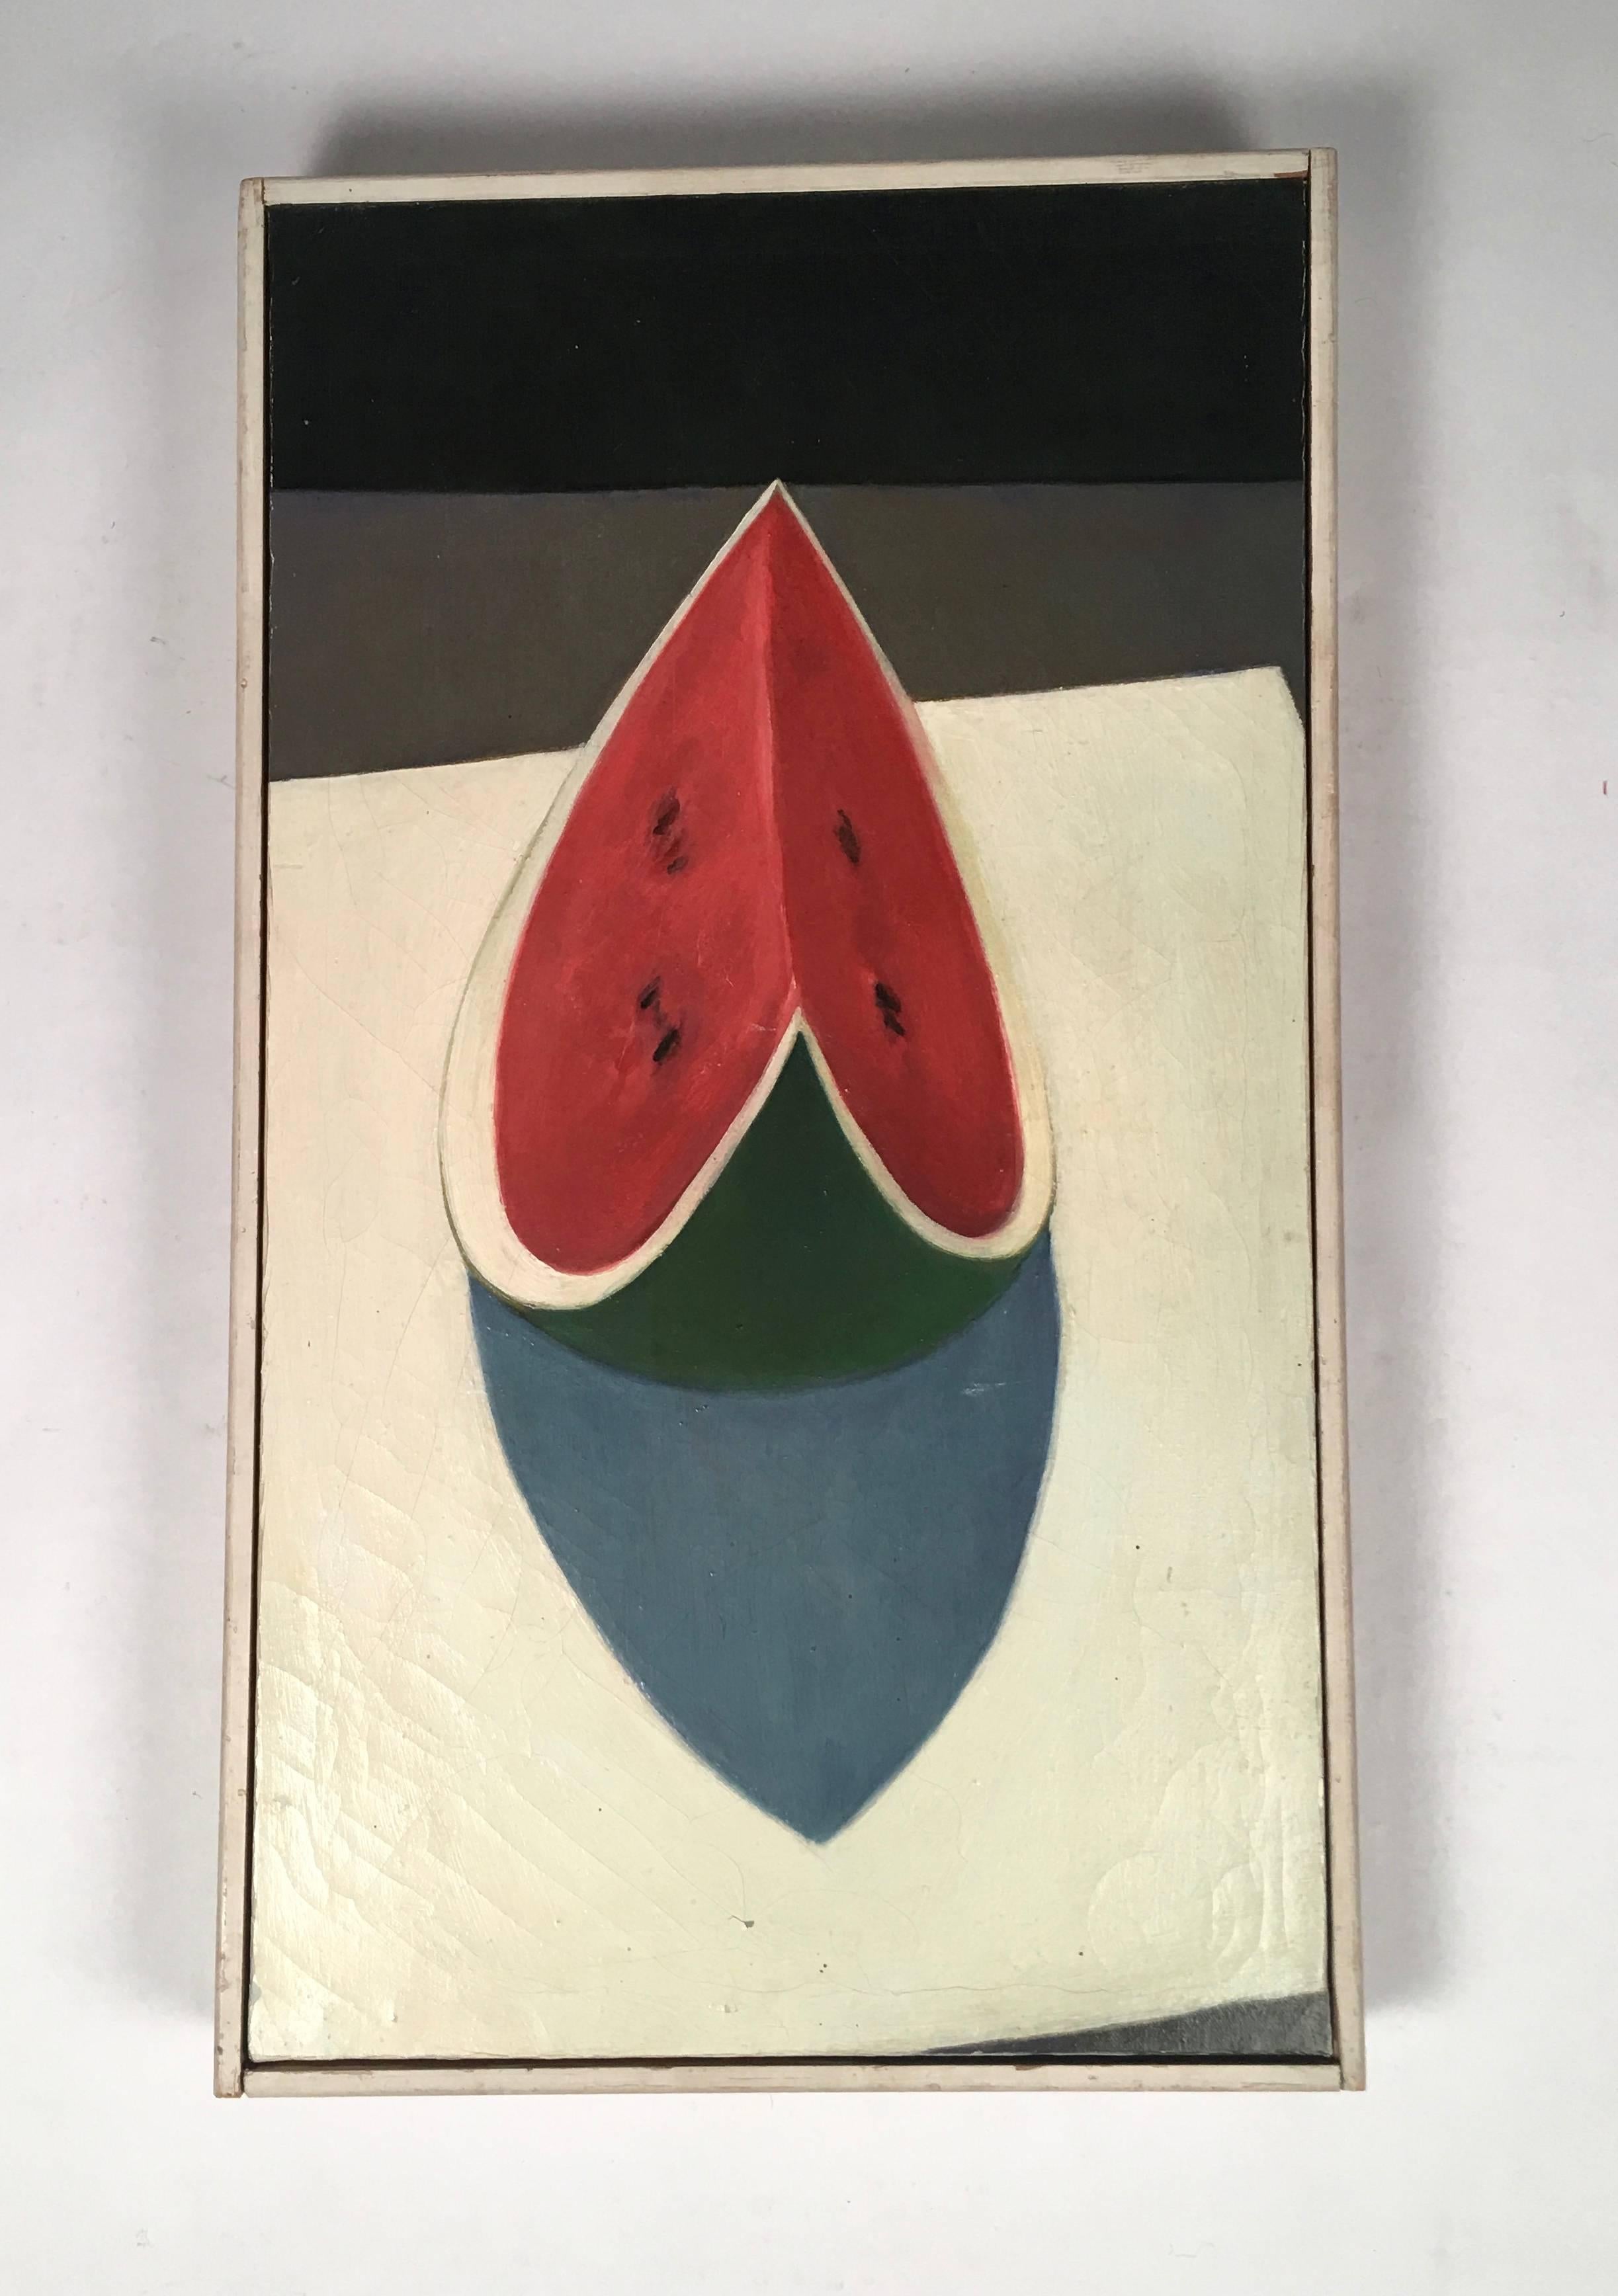 Hand-Painted Modernist Still Life Watermelon Painting, circa 1970s